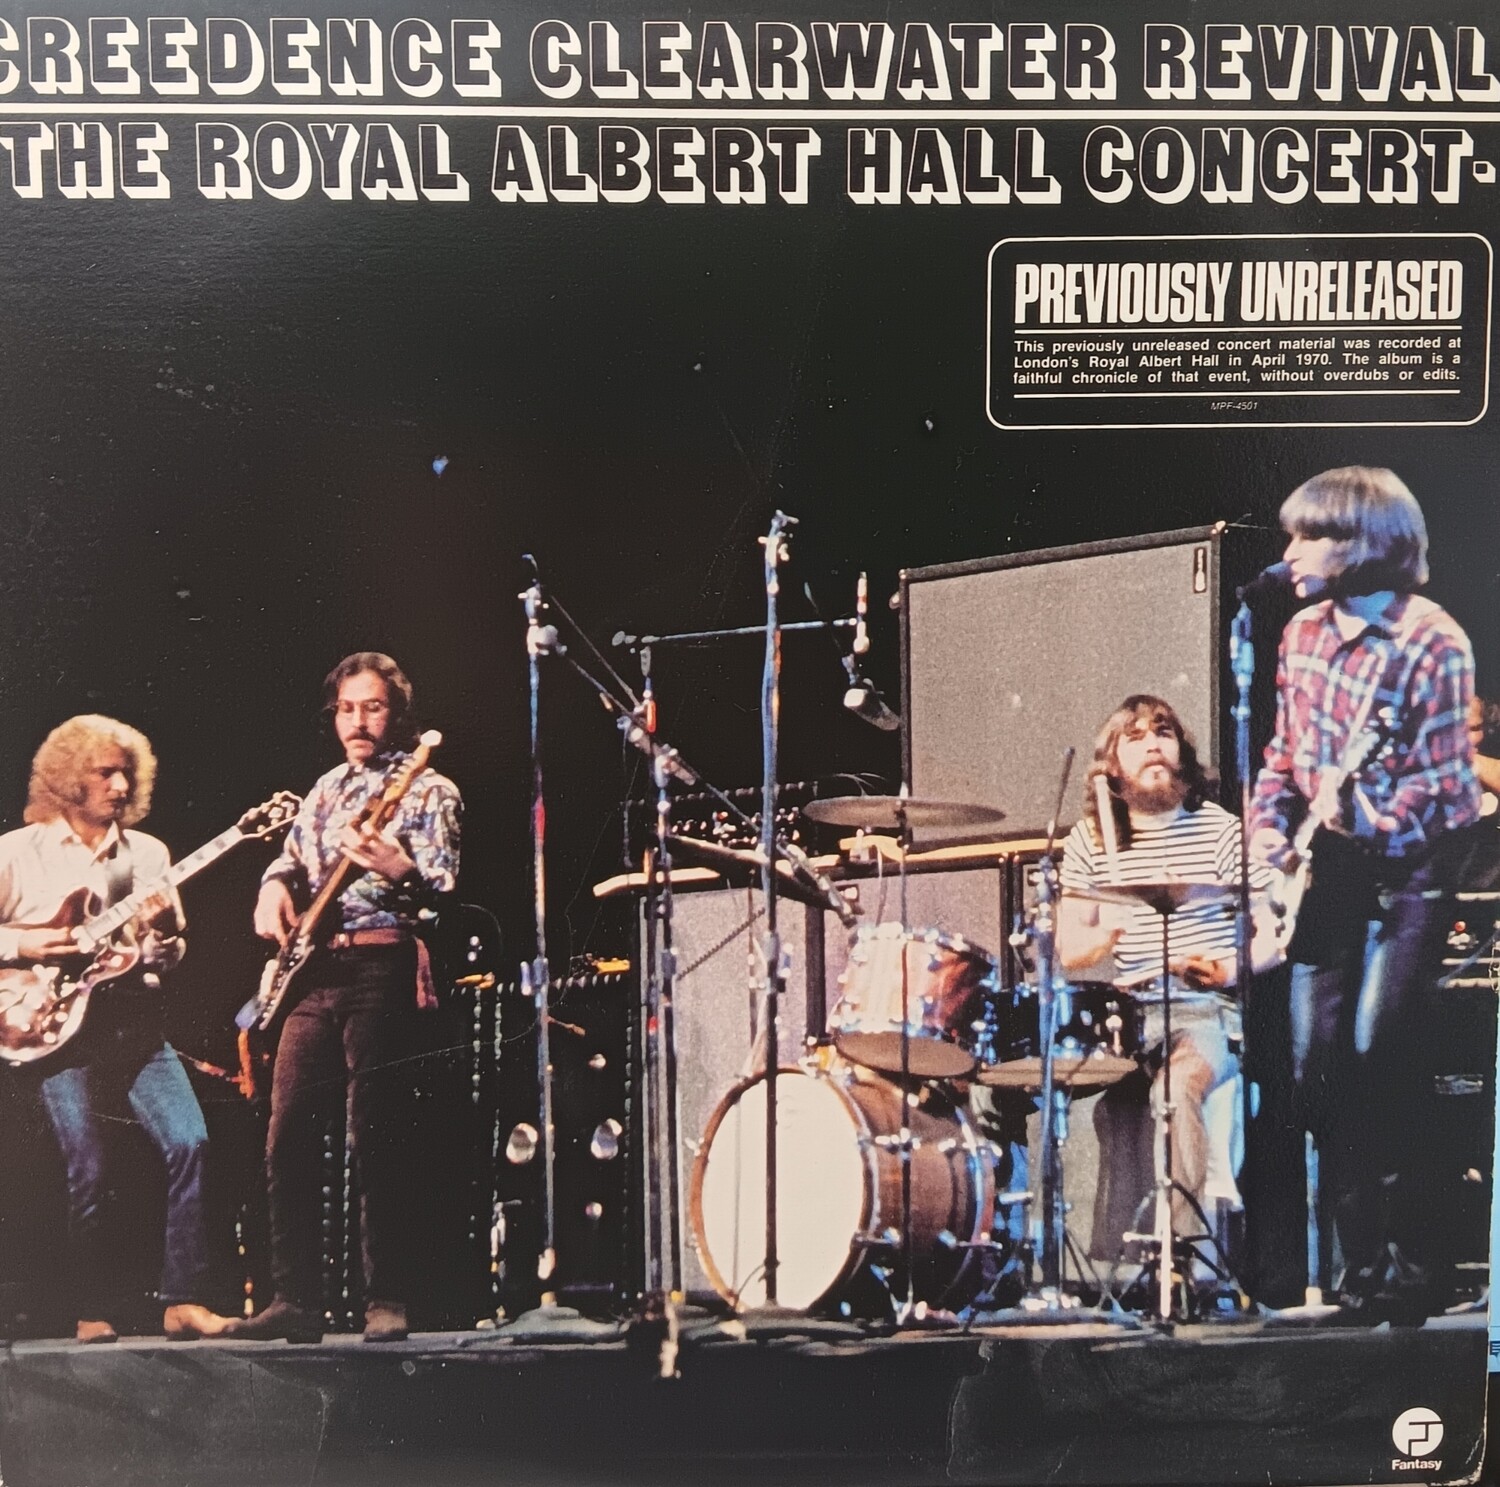 CREEDENCE CLEARWATER REVIVAL - The Royal Albert Hall Concert